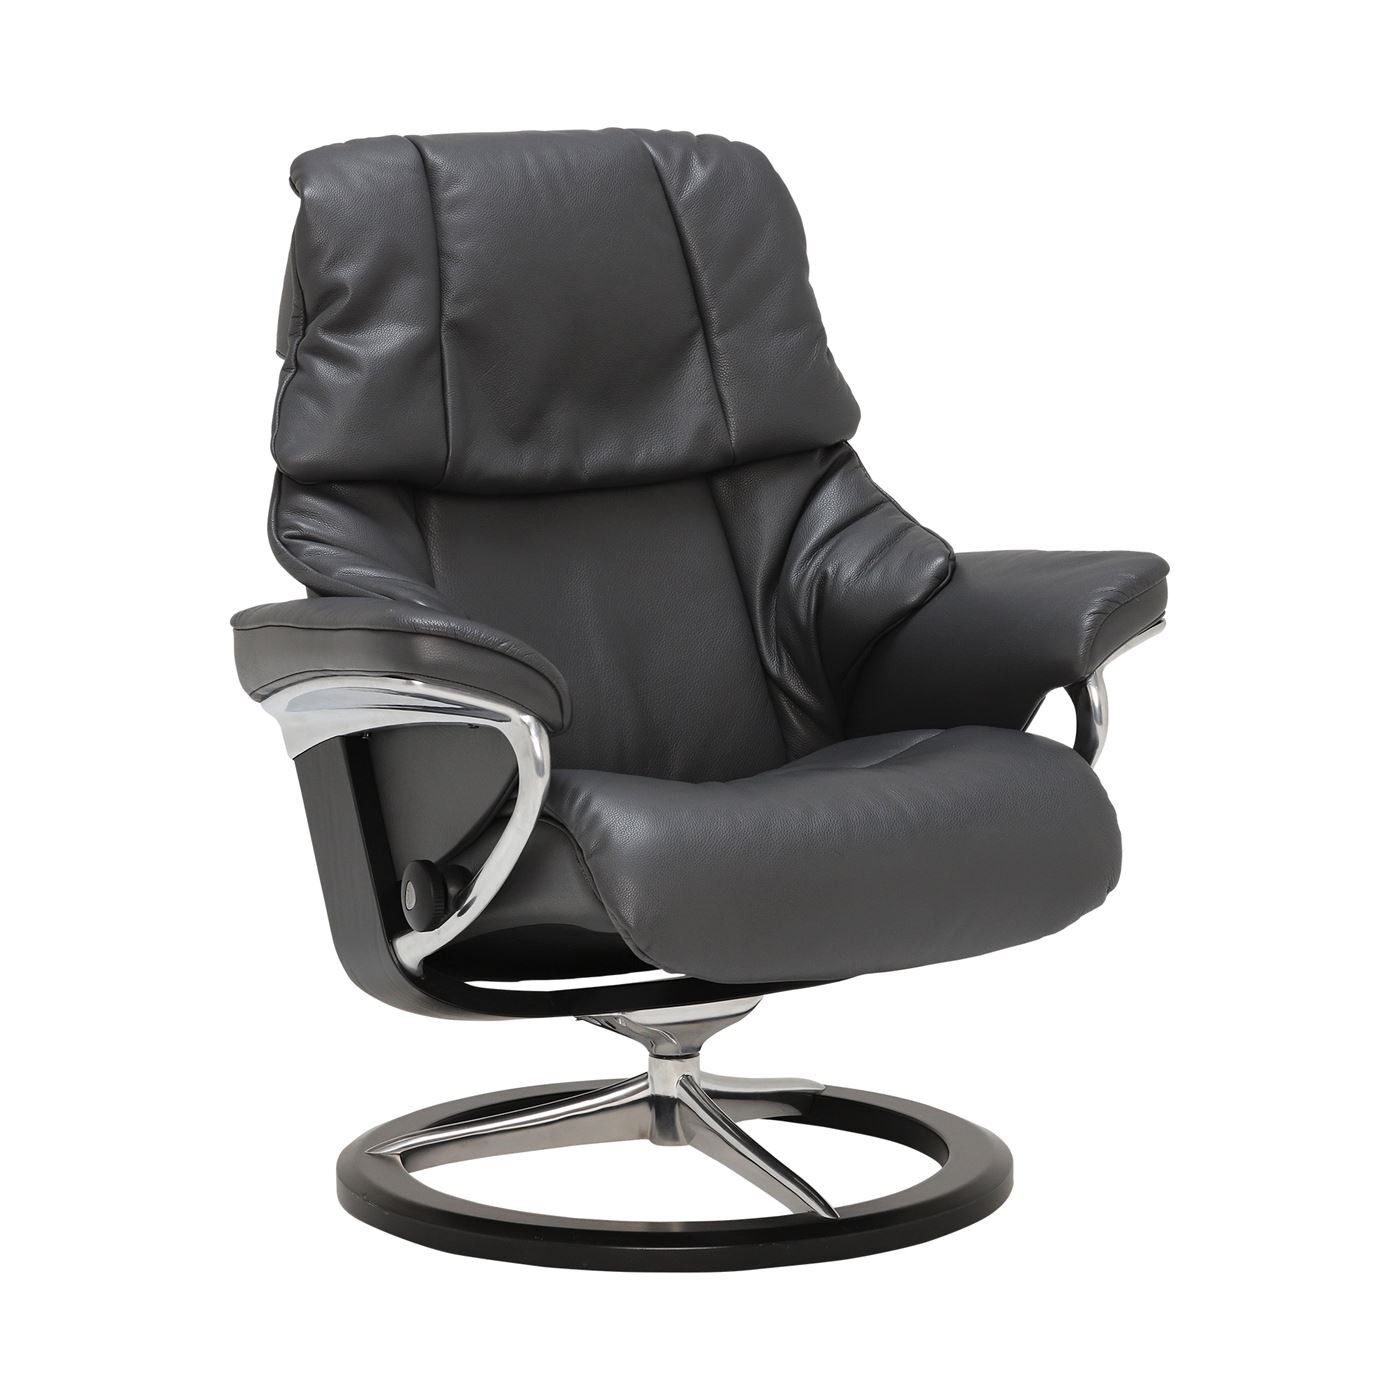 Stressless Reno Small Recliner Chair & Stool With Signature Base, Black Leather - Barker & Stonehouse - image 1